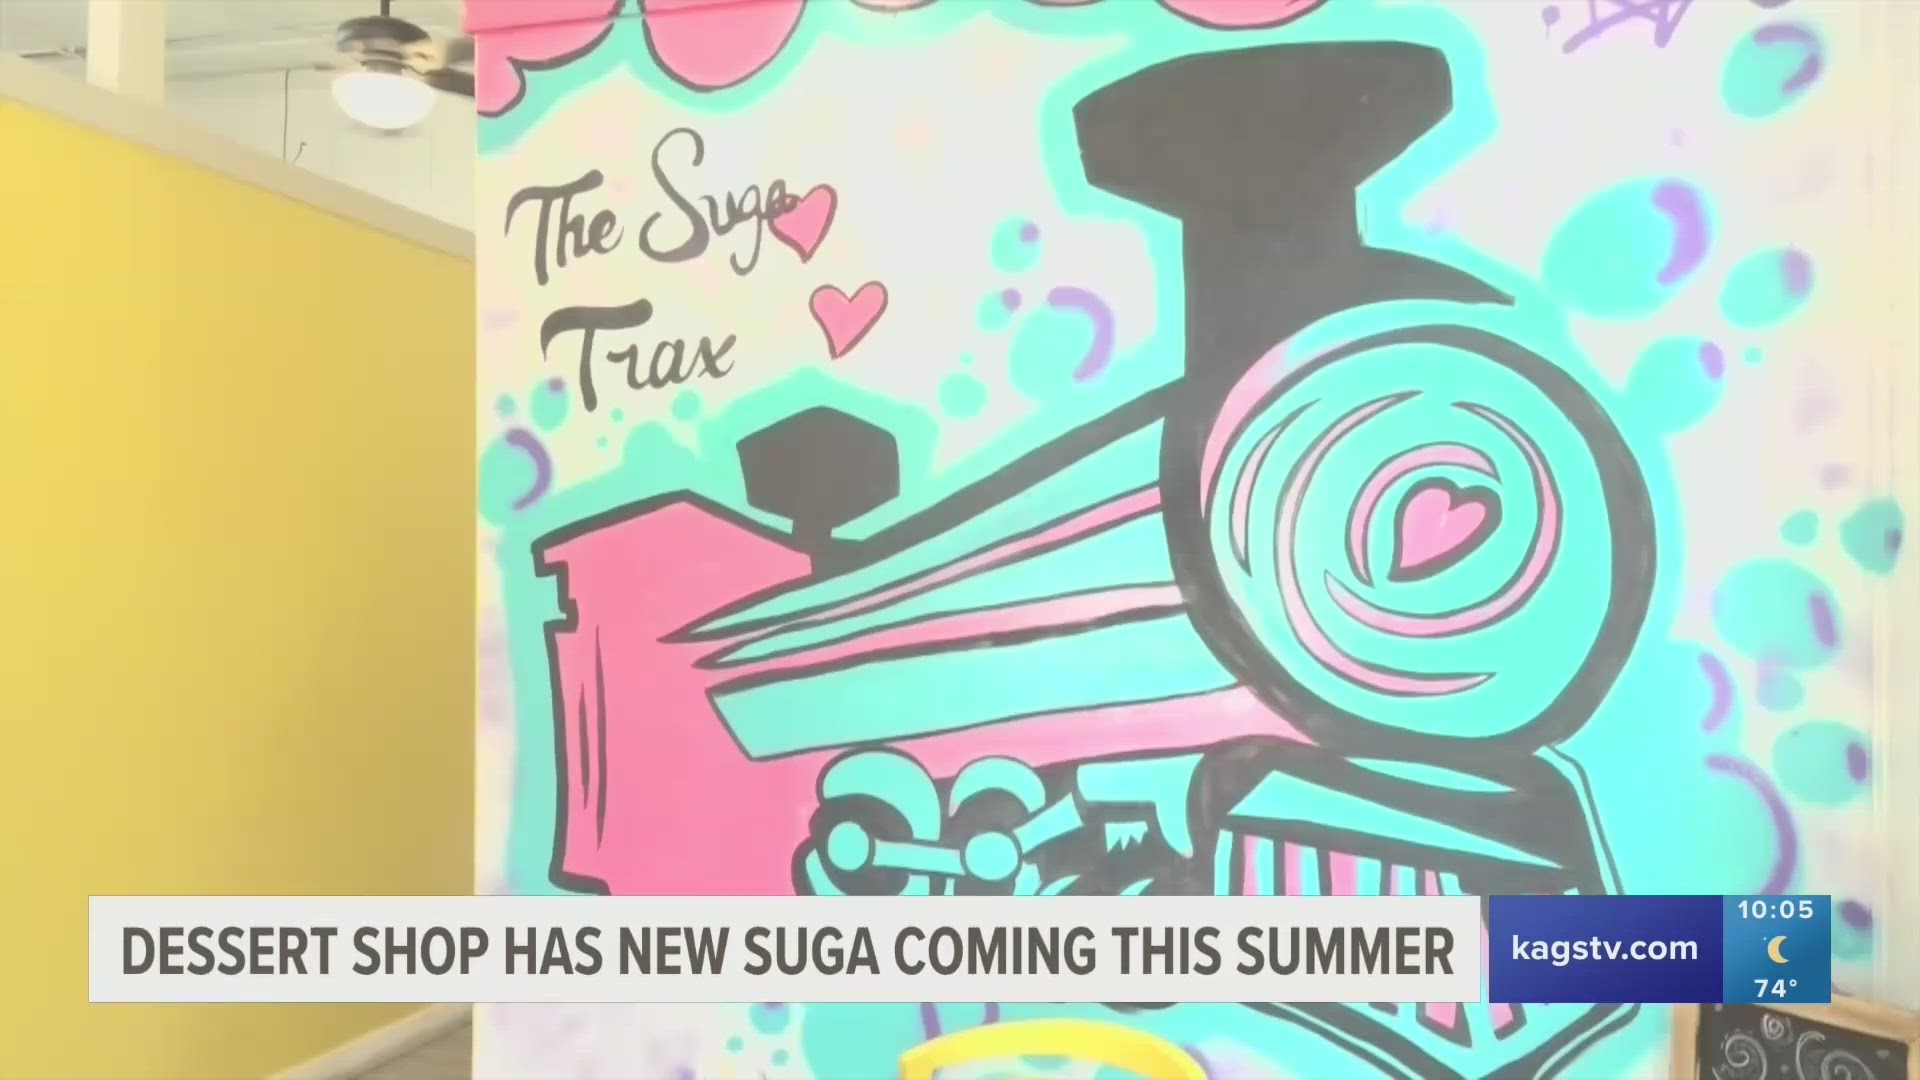 The Suga Trax has only been open for a month, but says that their goal was to show kids their purpose through the birth of the shop.